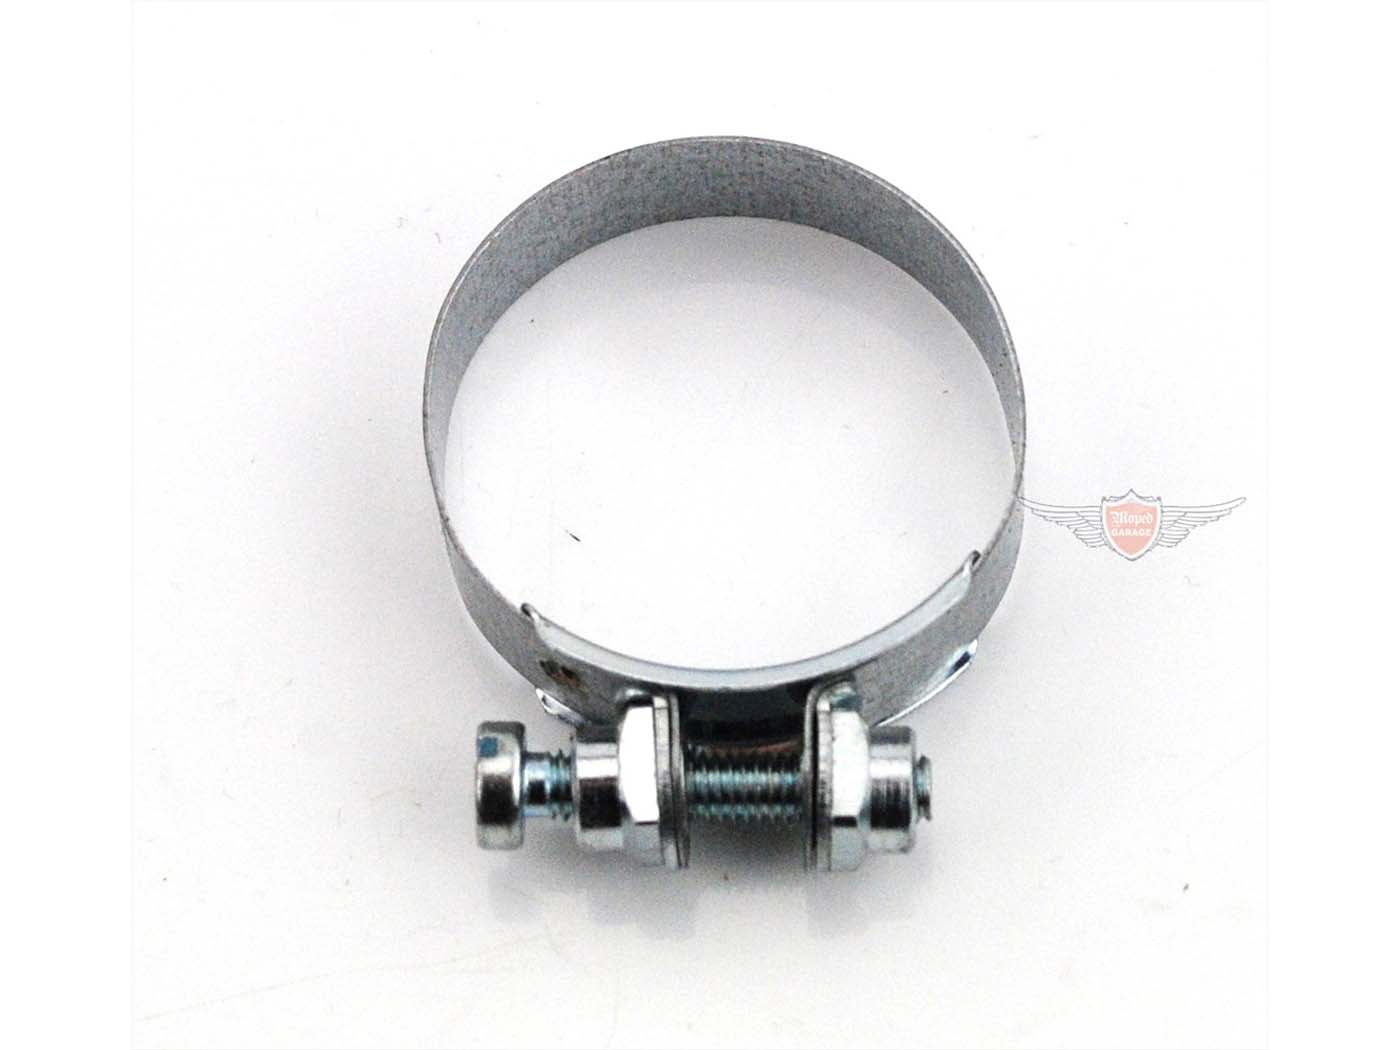 Clamp Intake Rubber Inner Diameter 32mm Wide 9mm For Moped, Moped, Mokick, Small Motorcycle